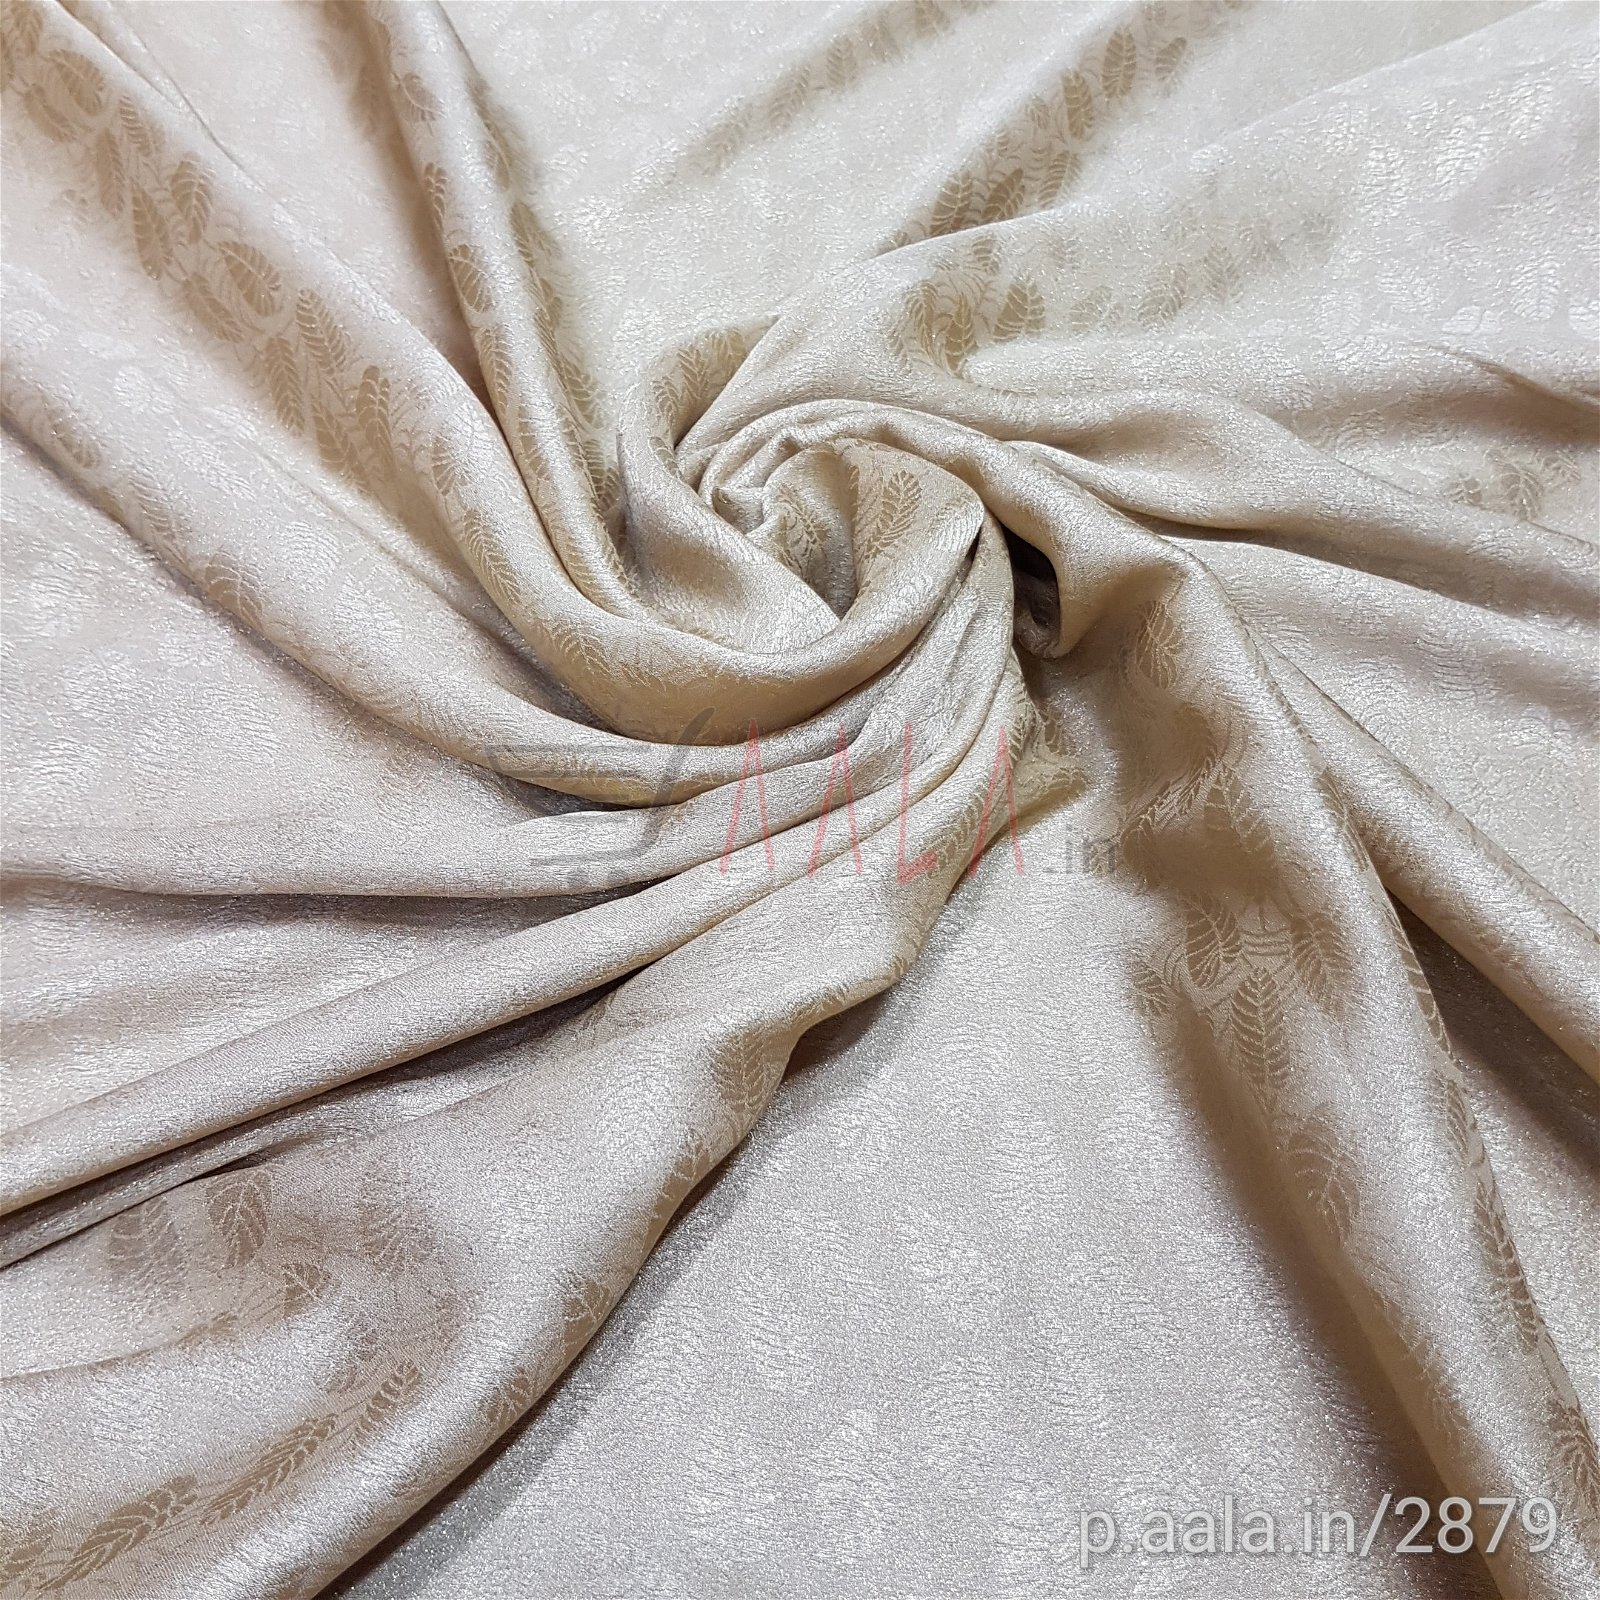 Jacquard Crepe Silk Poly-ester 44 Inches Dyed Per Metre #2879